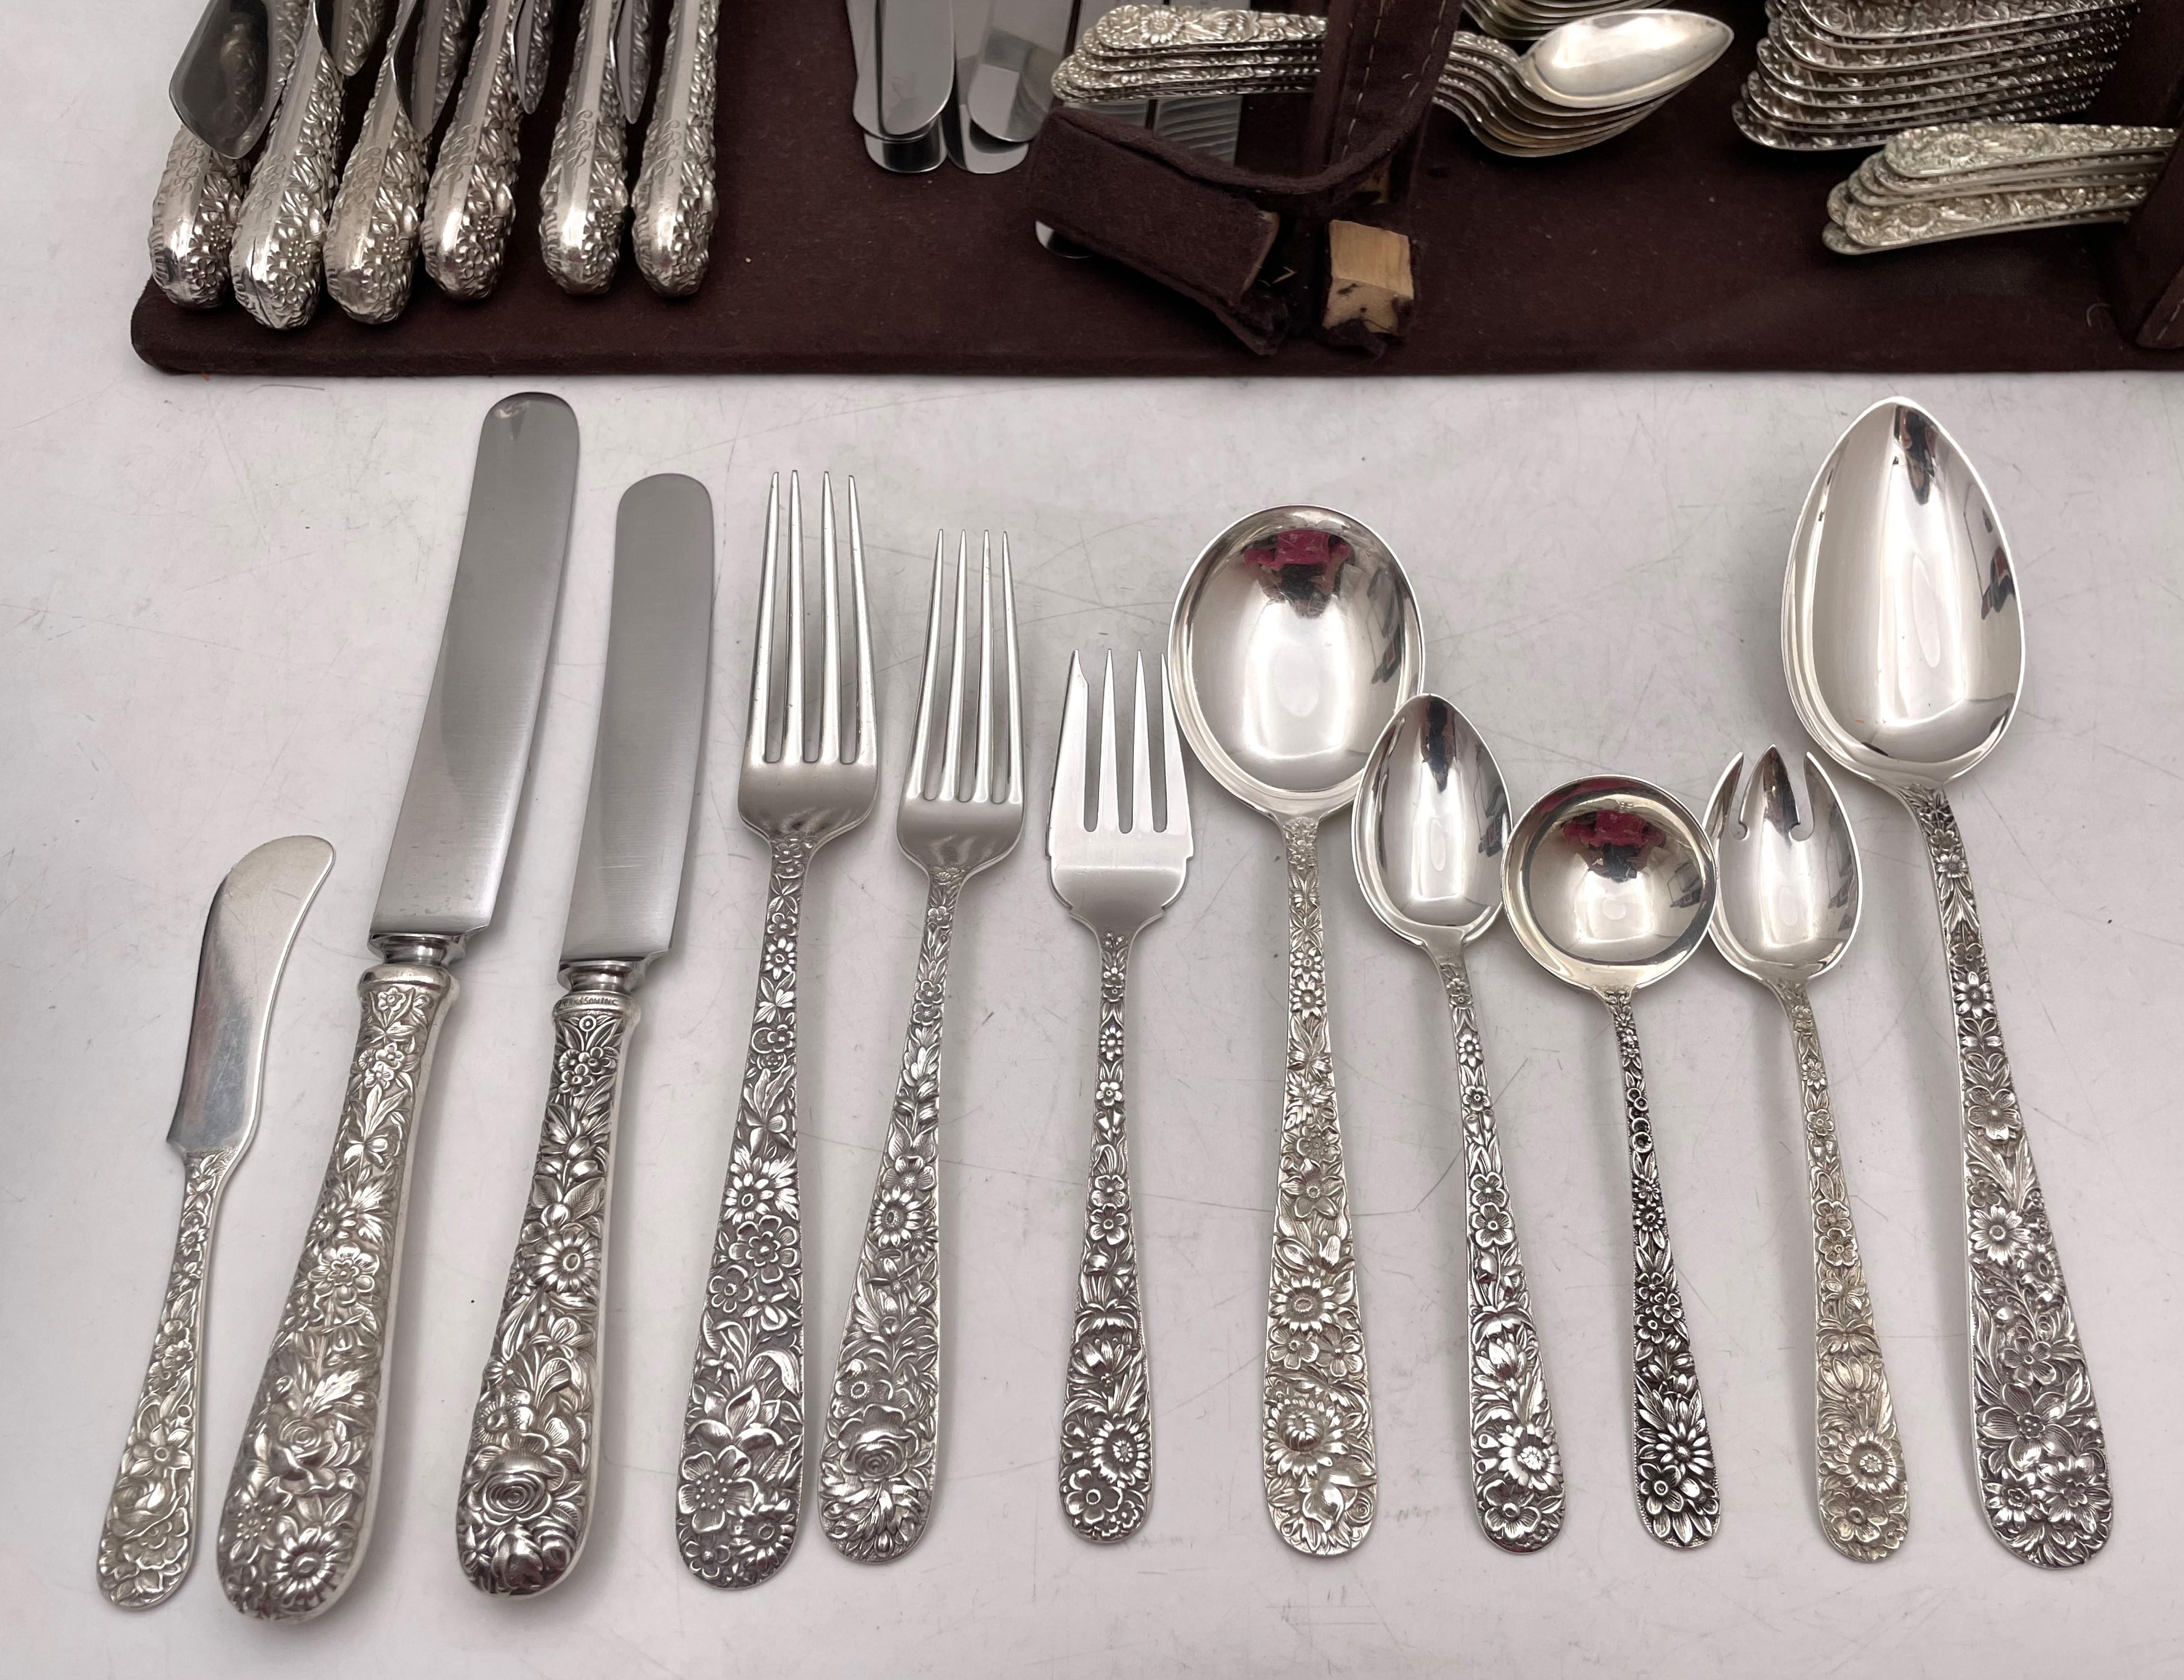 Rare S. Kirk & Sons old sterling silver flatware set in Repousse pattern, beautifully adorned with floral motifs, from the 19th century, consisting of: 

- 12 dinner knives with old French stainless steel blades measuring 9 1/4'' in length 

- 8